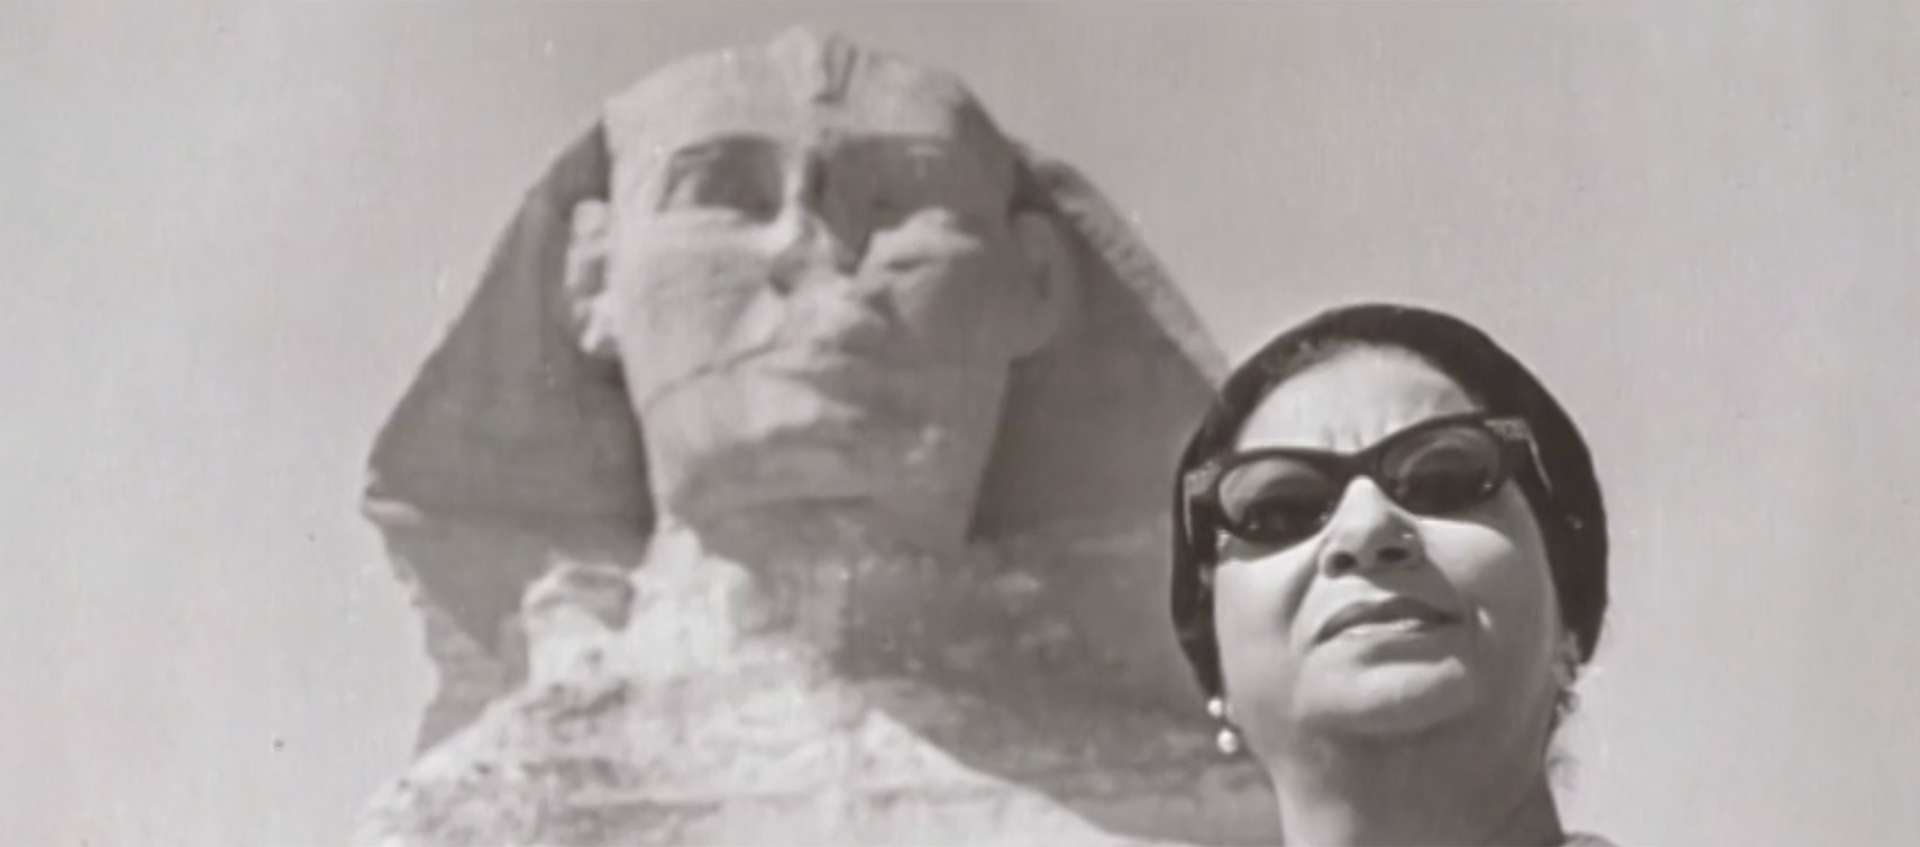 A black-and-white photo of Umm Kulthum, who wears dark sunglasses and a dark hat. Behind her is the Great Sphinx of Giza.